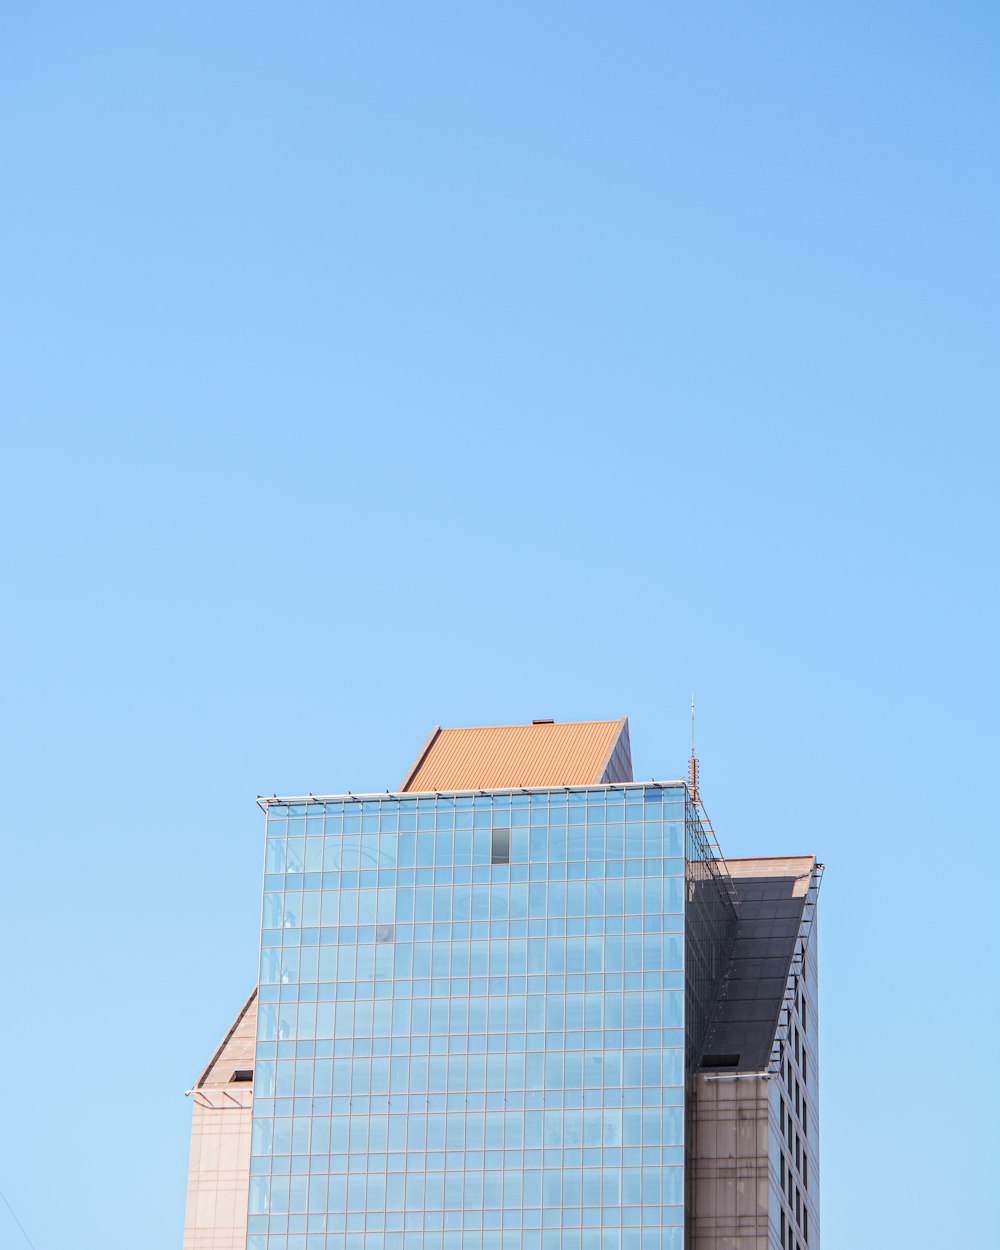 blue and brown concrete building under blue sky during daytime